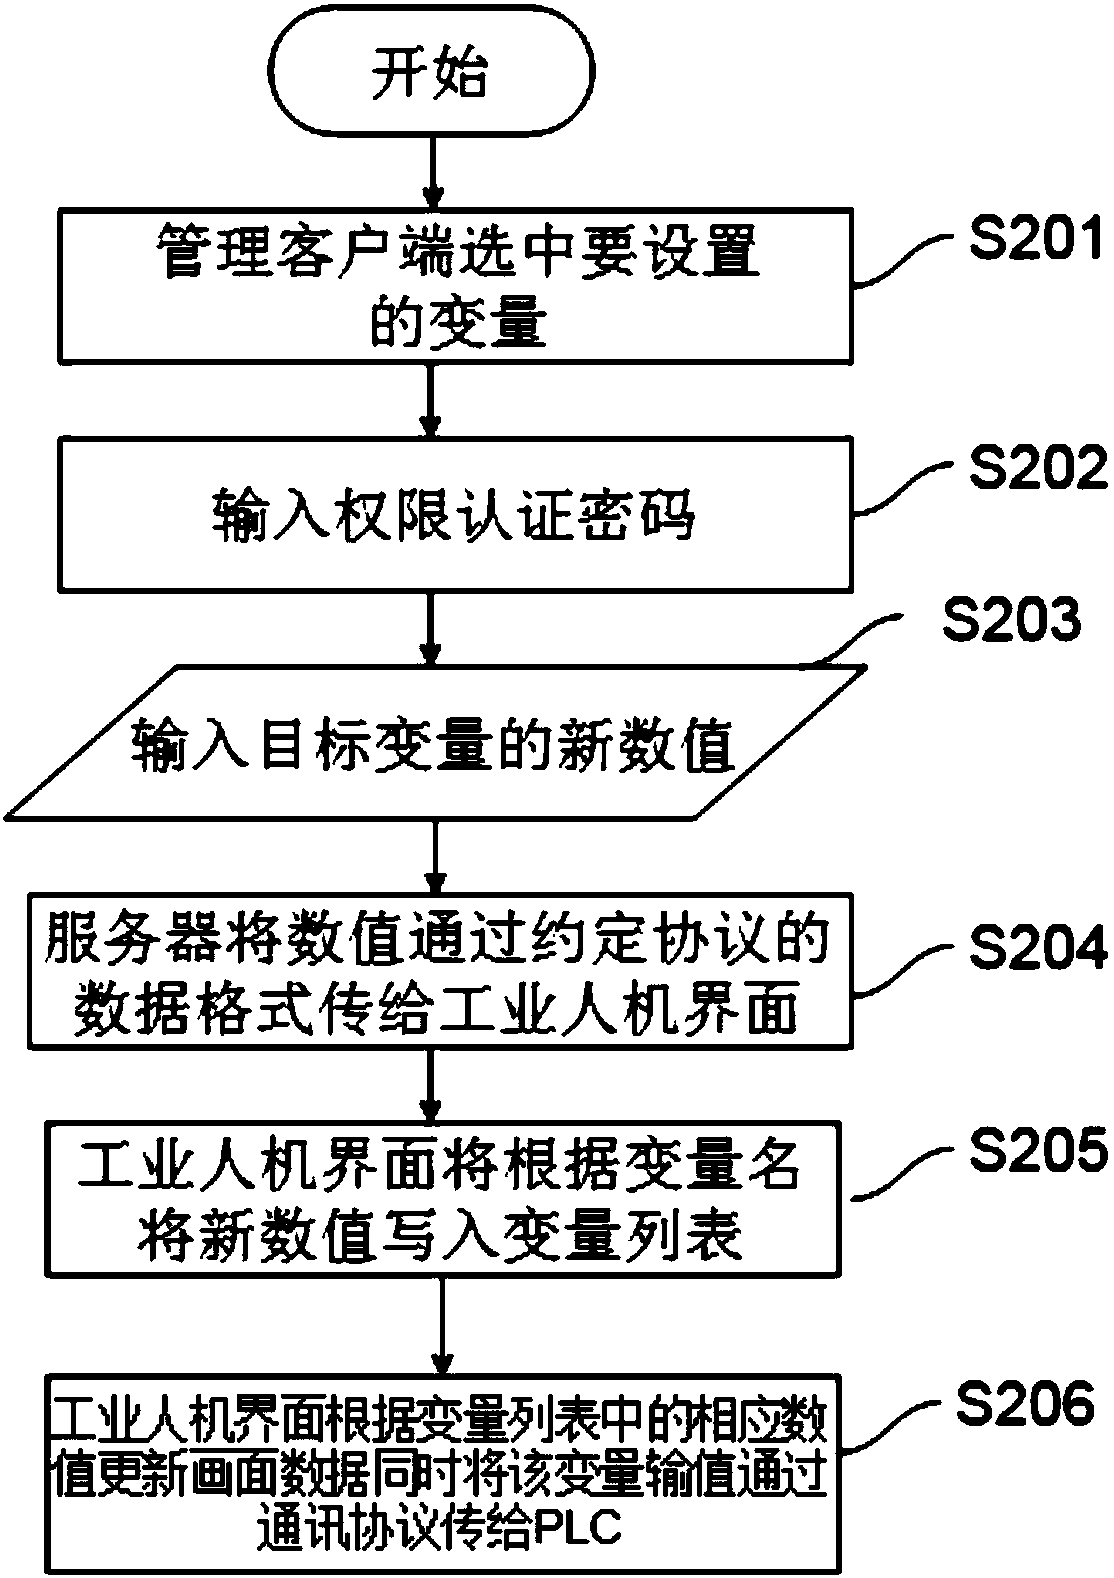 Remote industrial site management system and method based on industrial main-machine interface